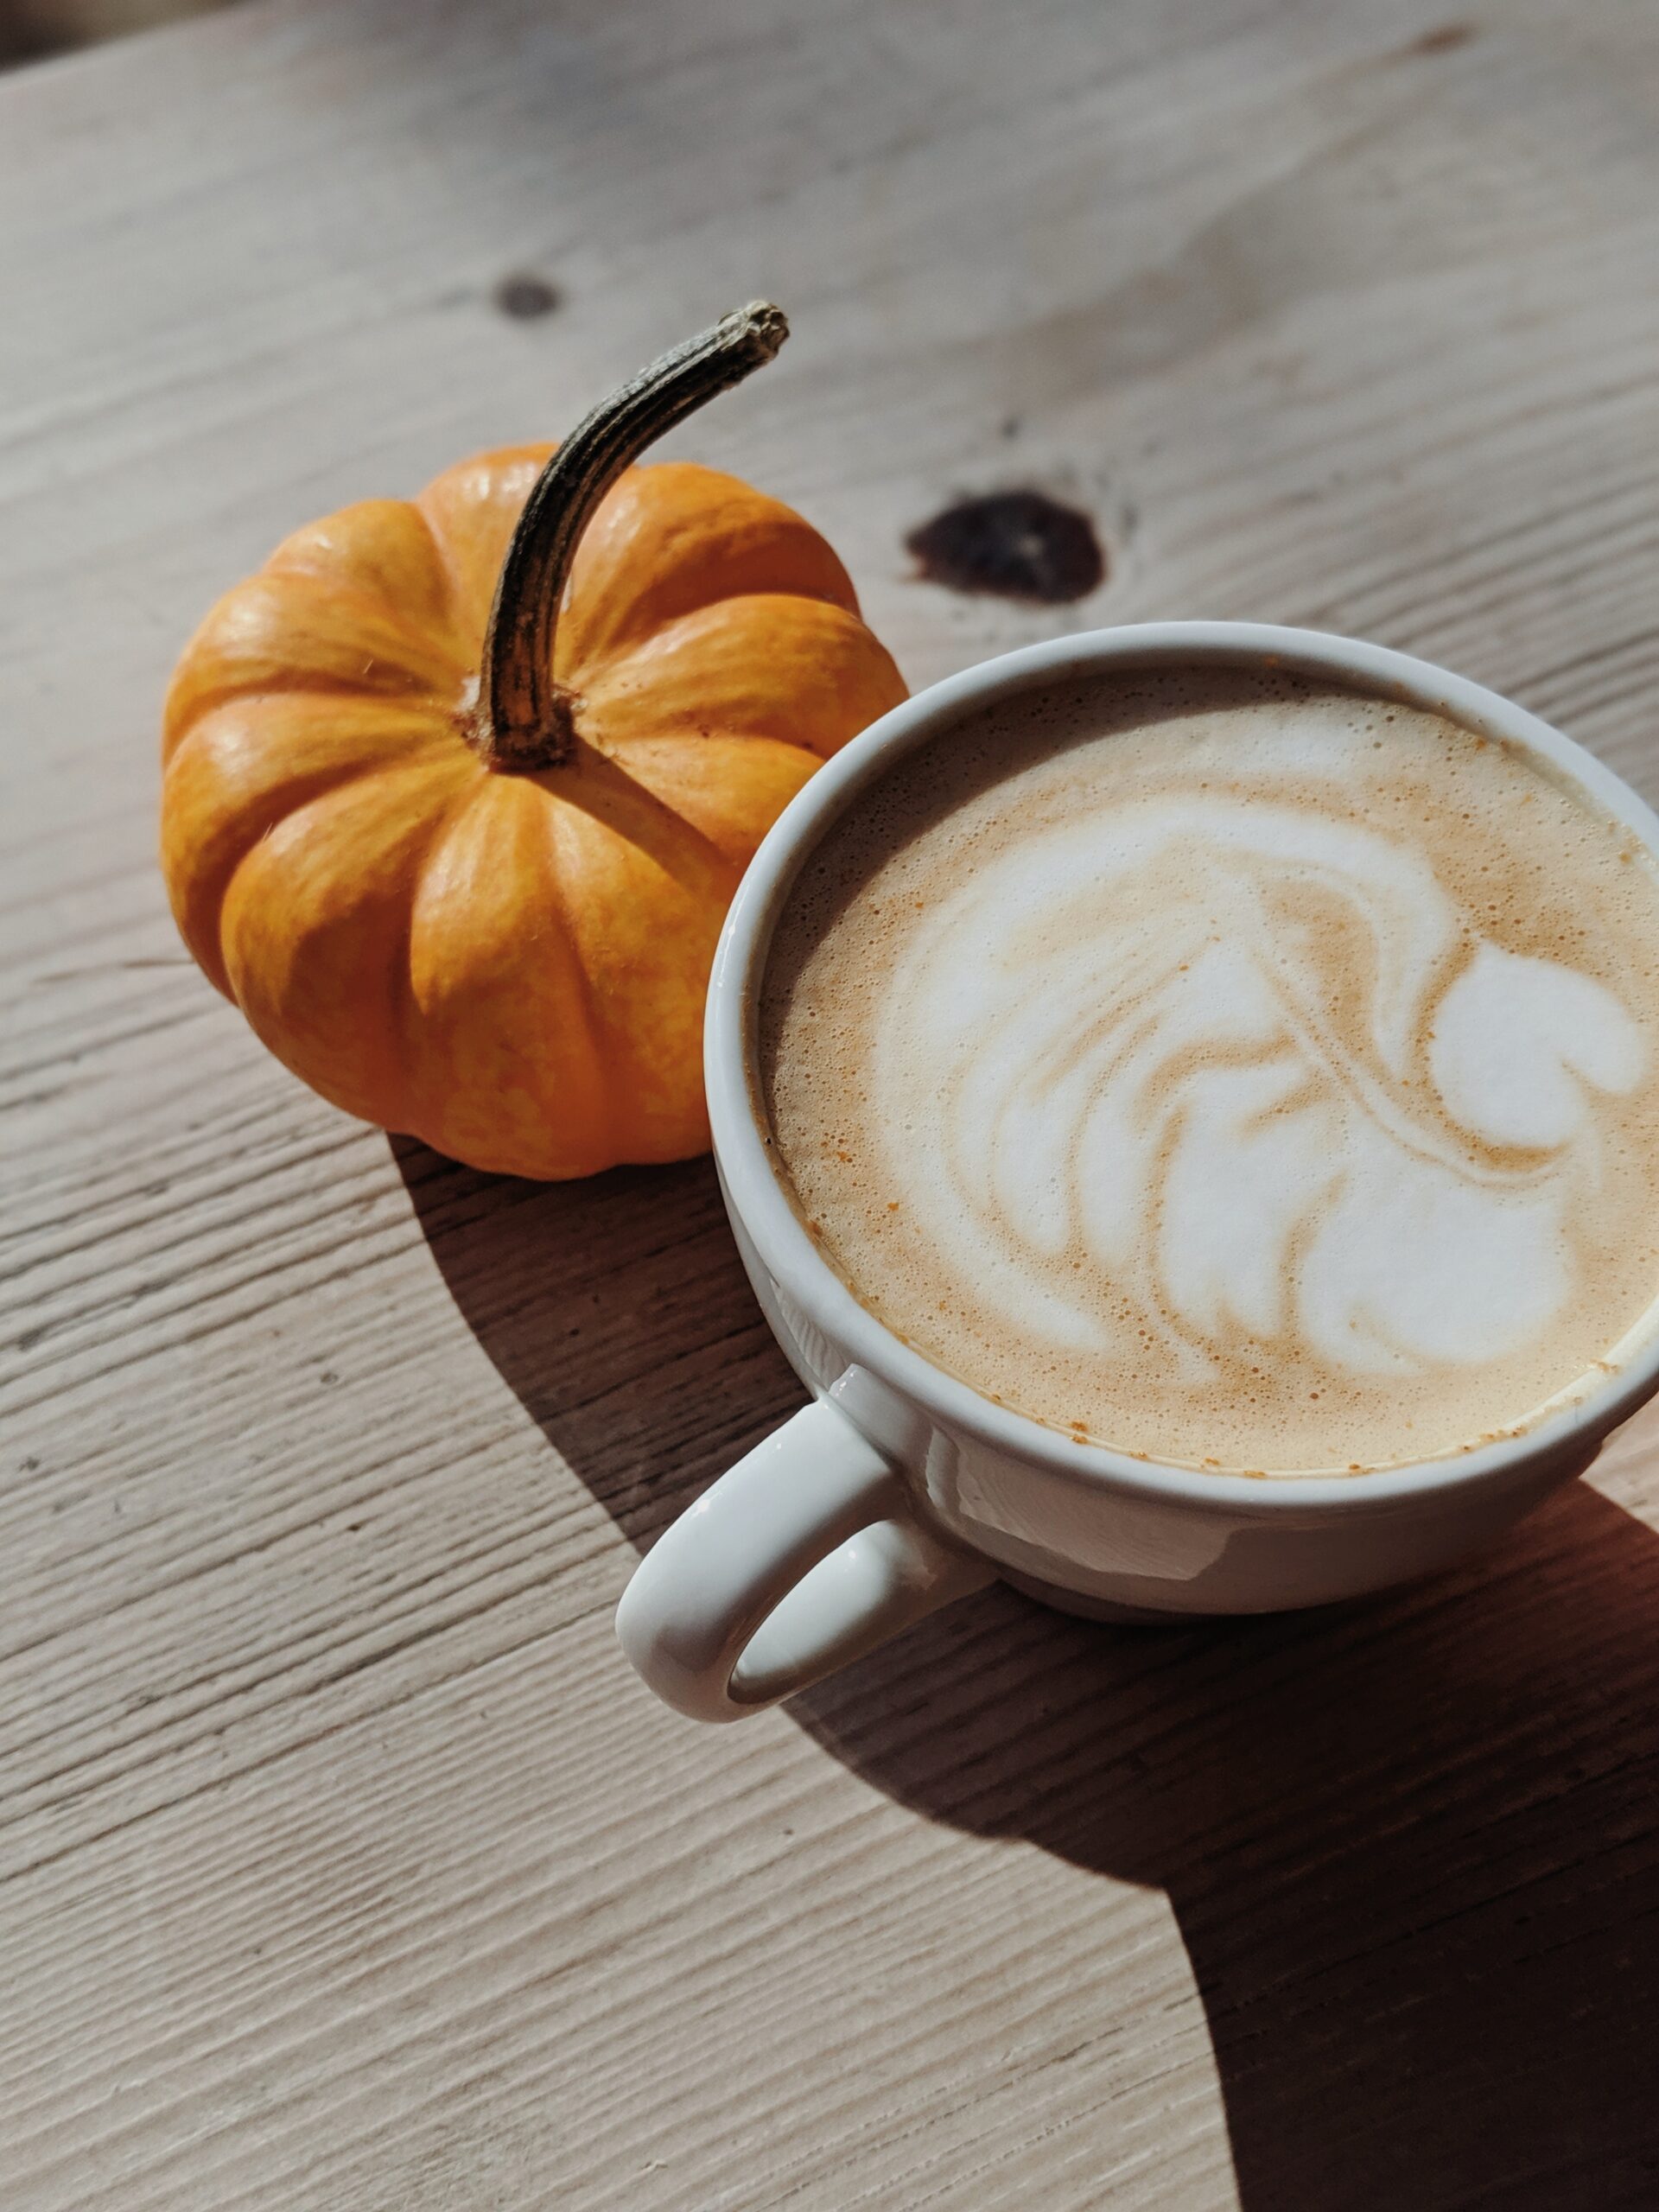 Burnt Out on Pumpkin Spice? New Ways to Enjoy the Flavors of Fall